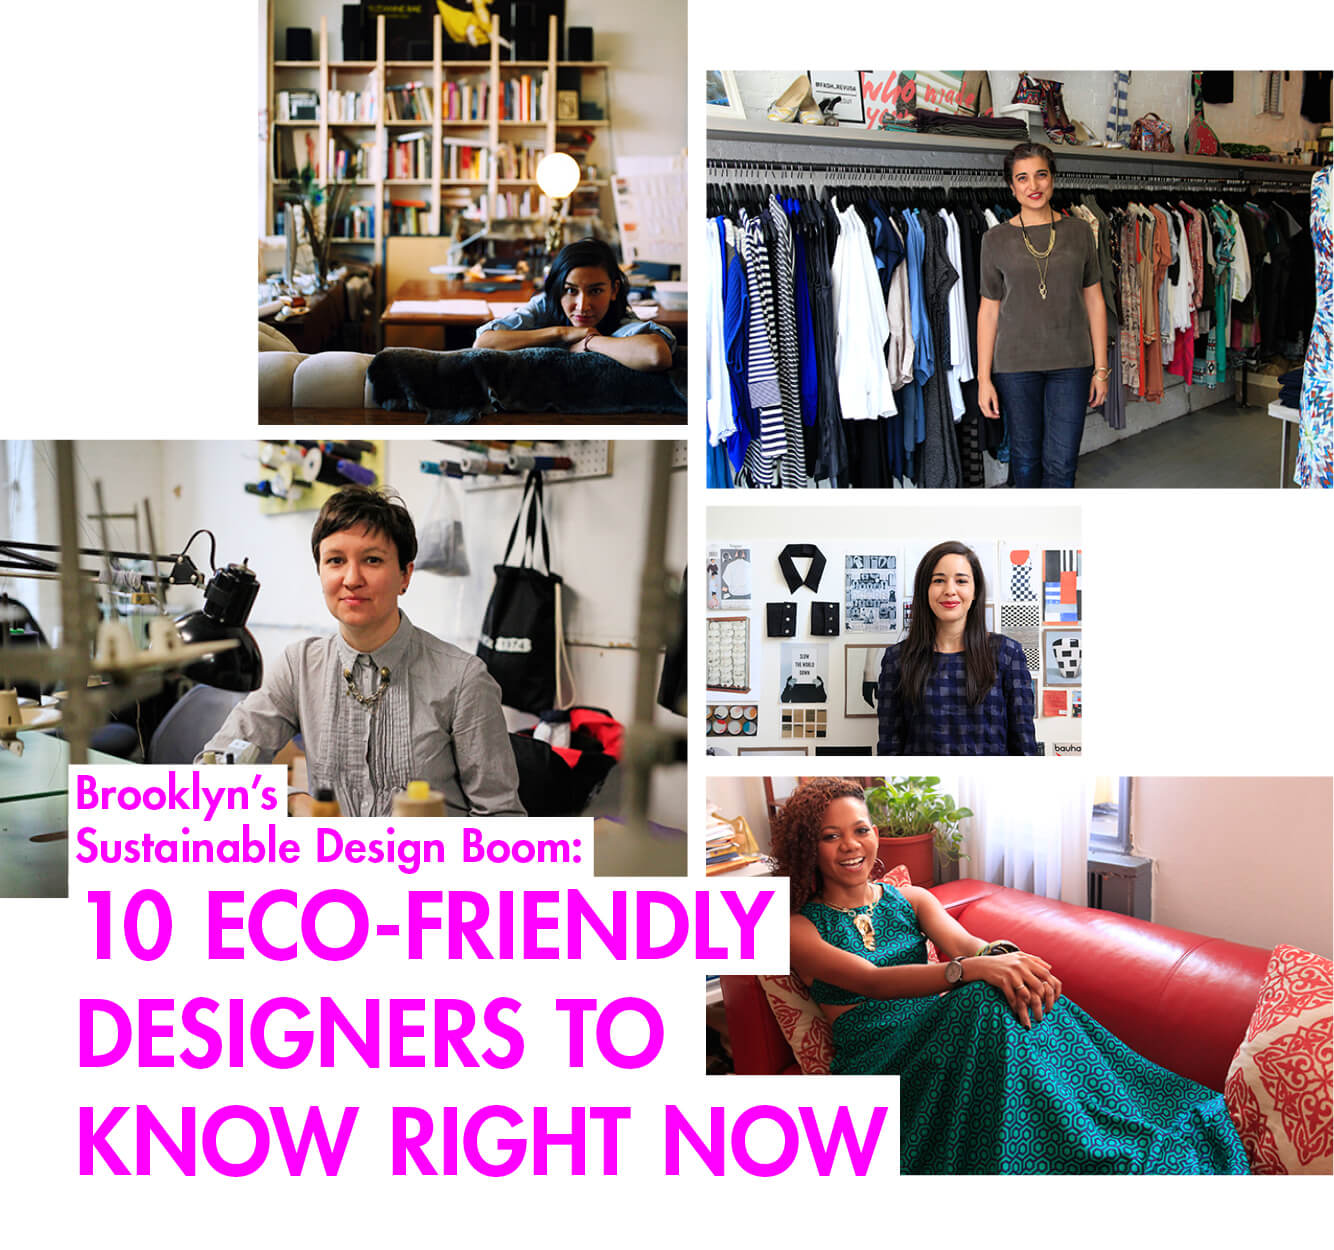 10 Eco-Friendly Designers to Know Right Now